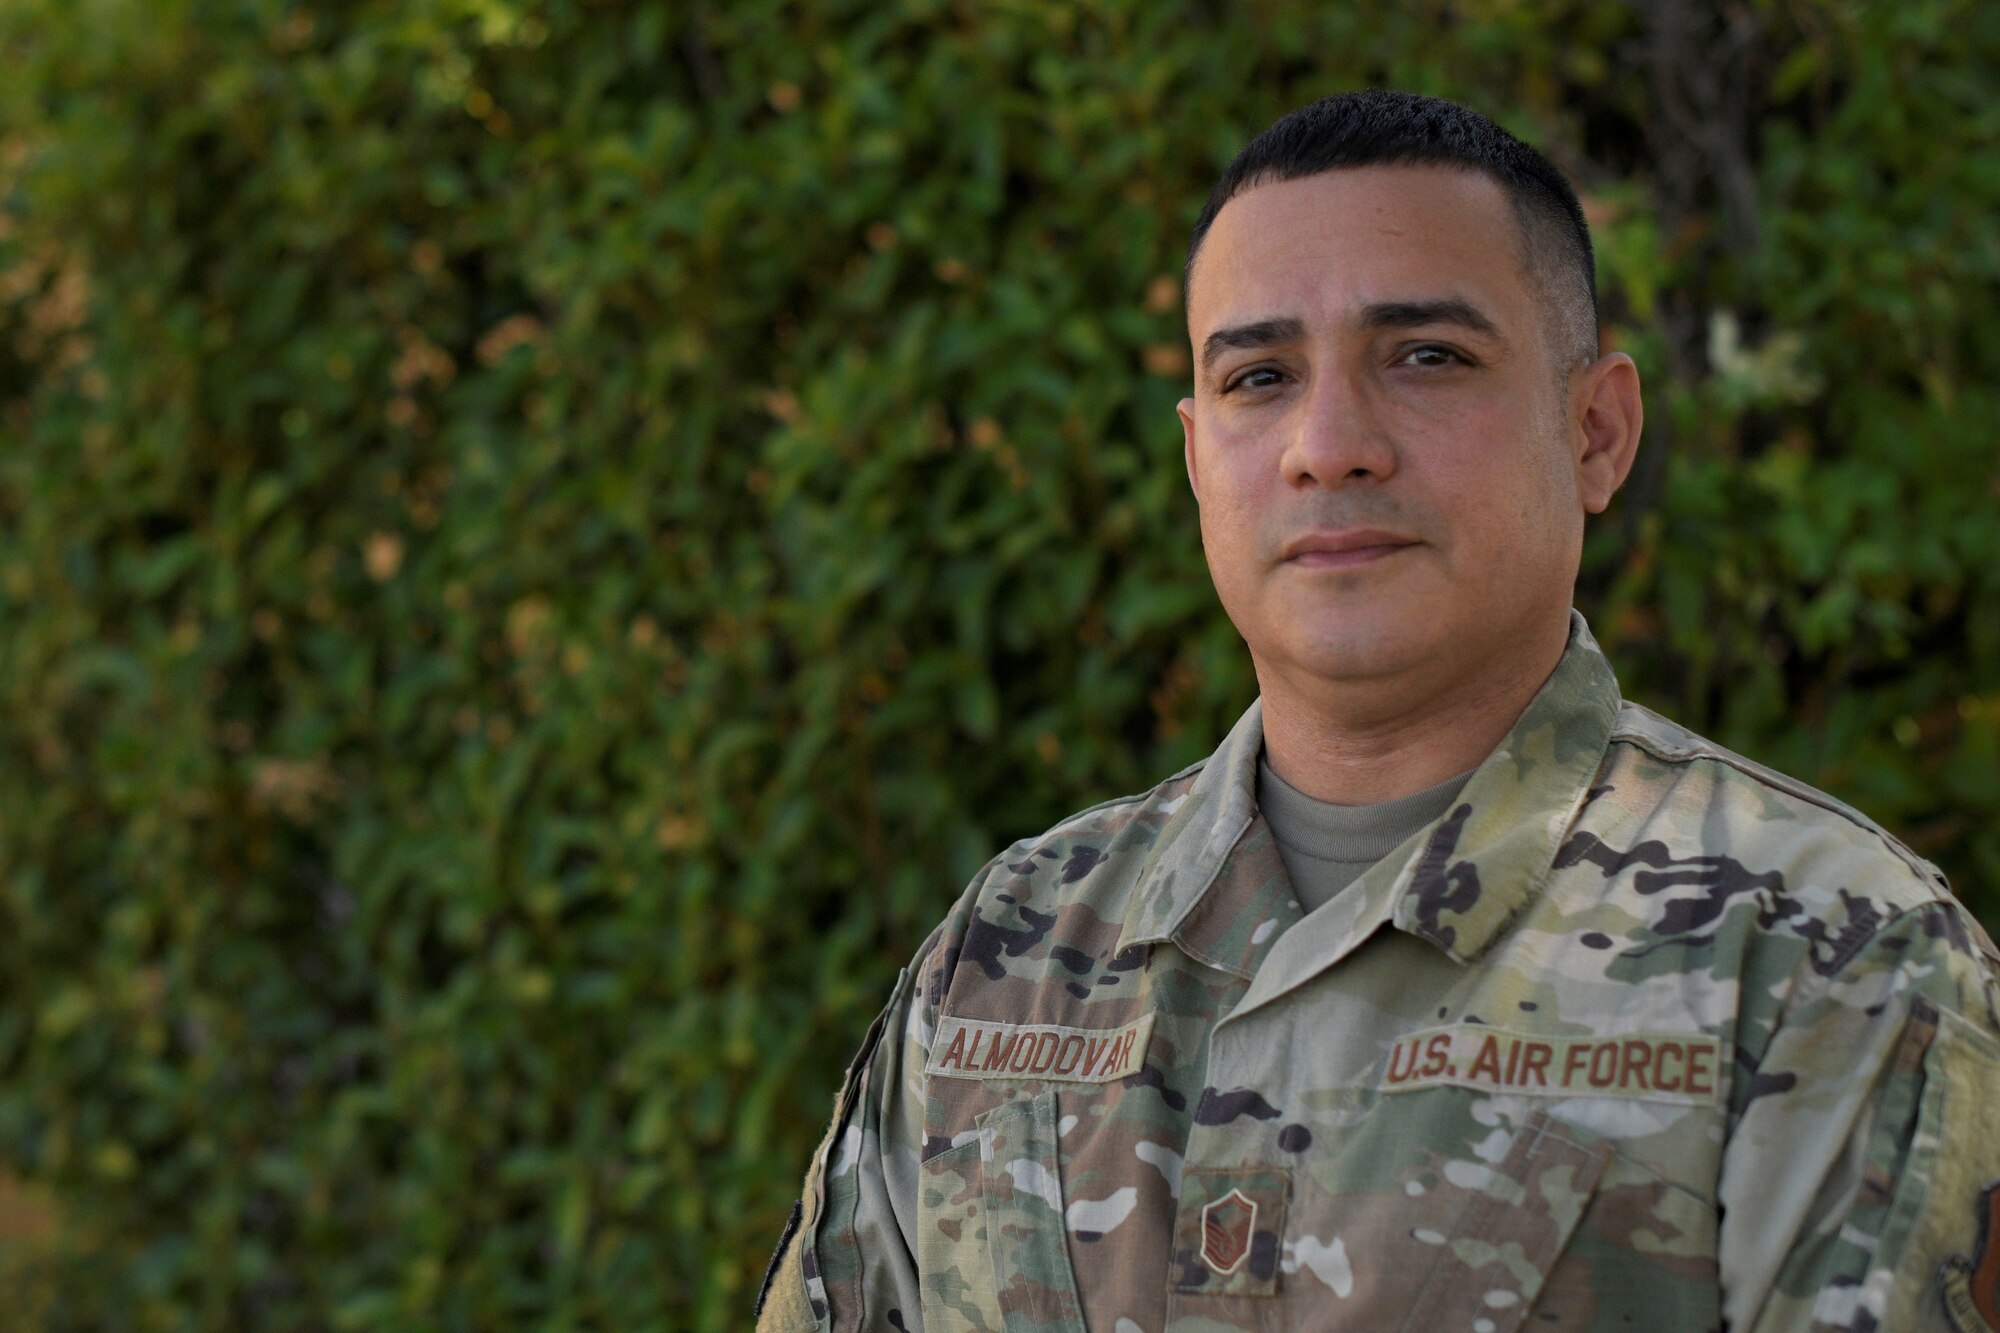 Master Sgt. Jason Almodovar, 301st Fighter Wing Equal Opportunity Office senior enlisted leader, represents the 301 FW EO team at Naval Air Station Joint Reserve Base Fort Worth, Texas, July 20, 2022. Almodovar facilitates conflict resolution and ensures leaders understand their responsibility to address and eliminate unlawful discrimination and sexual harassment, while executing the 301 FW mission to train and deploy combat-ready Airmen. (U.S. Air Force photo by Staff Sgt. Randall Moose)